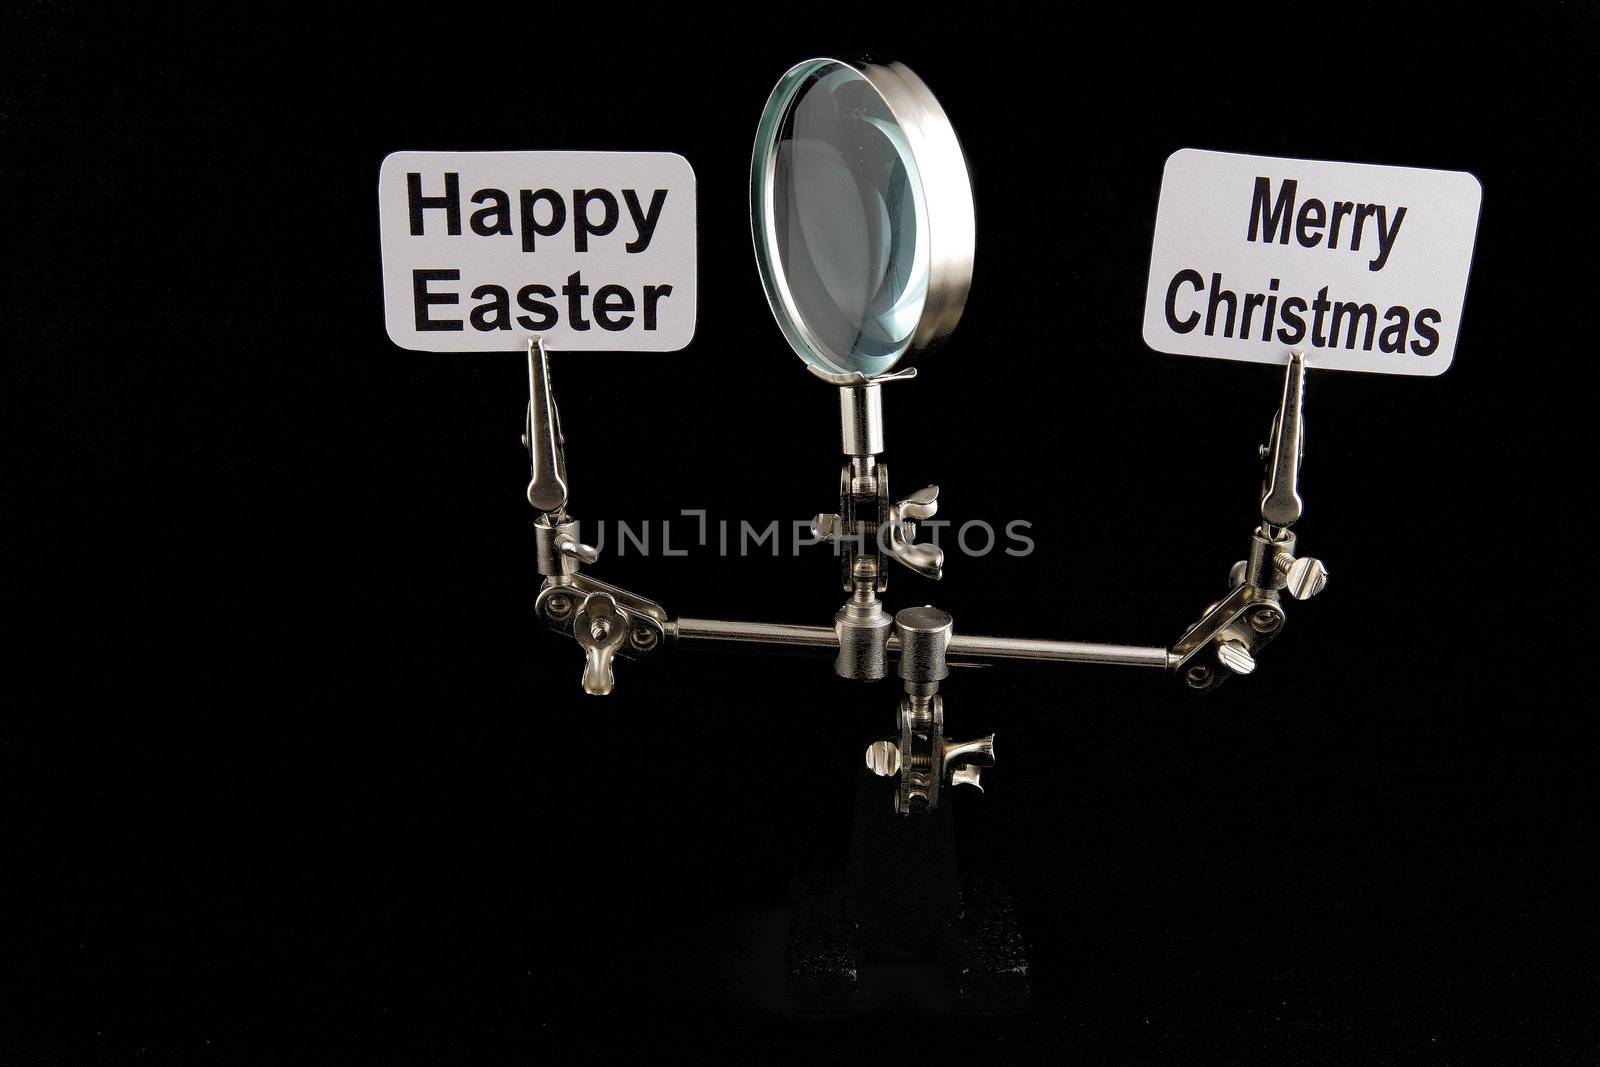 figure of steel man with "Happy Easter" and "Merry Chrostmas" inscriptions on black background